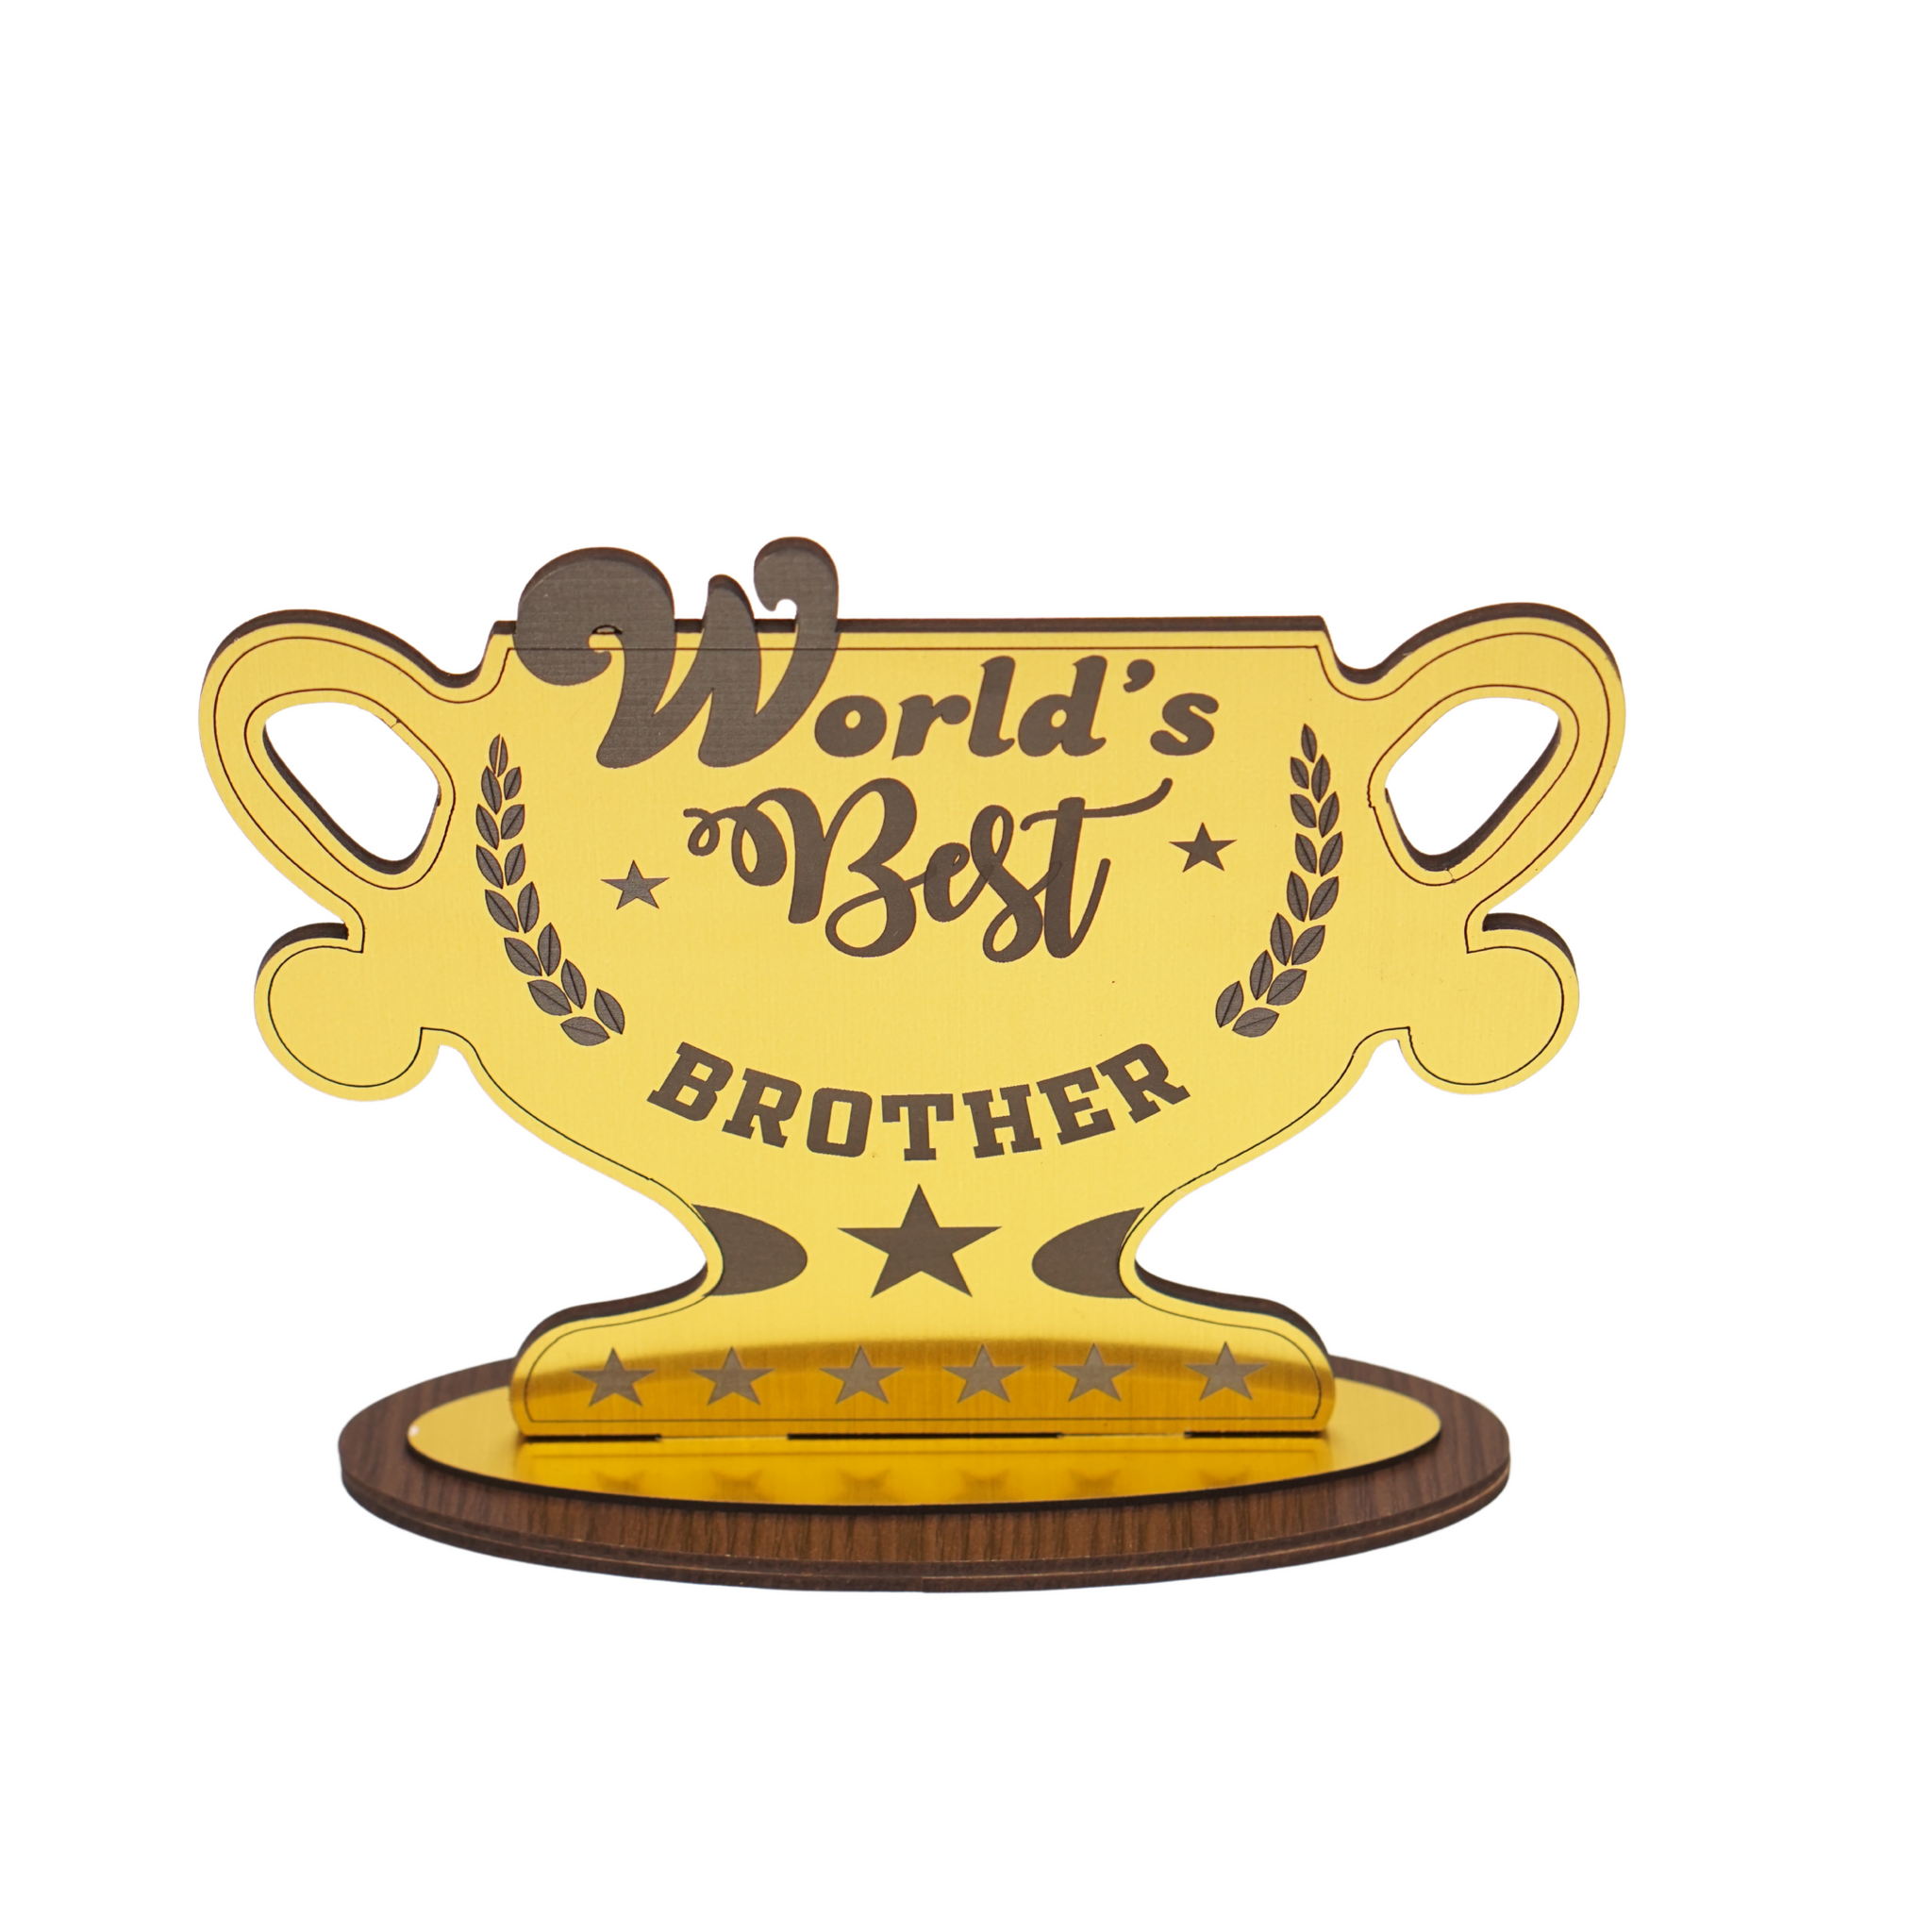 World's Best Brother Trophy